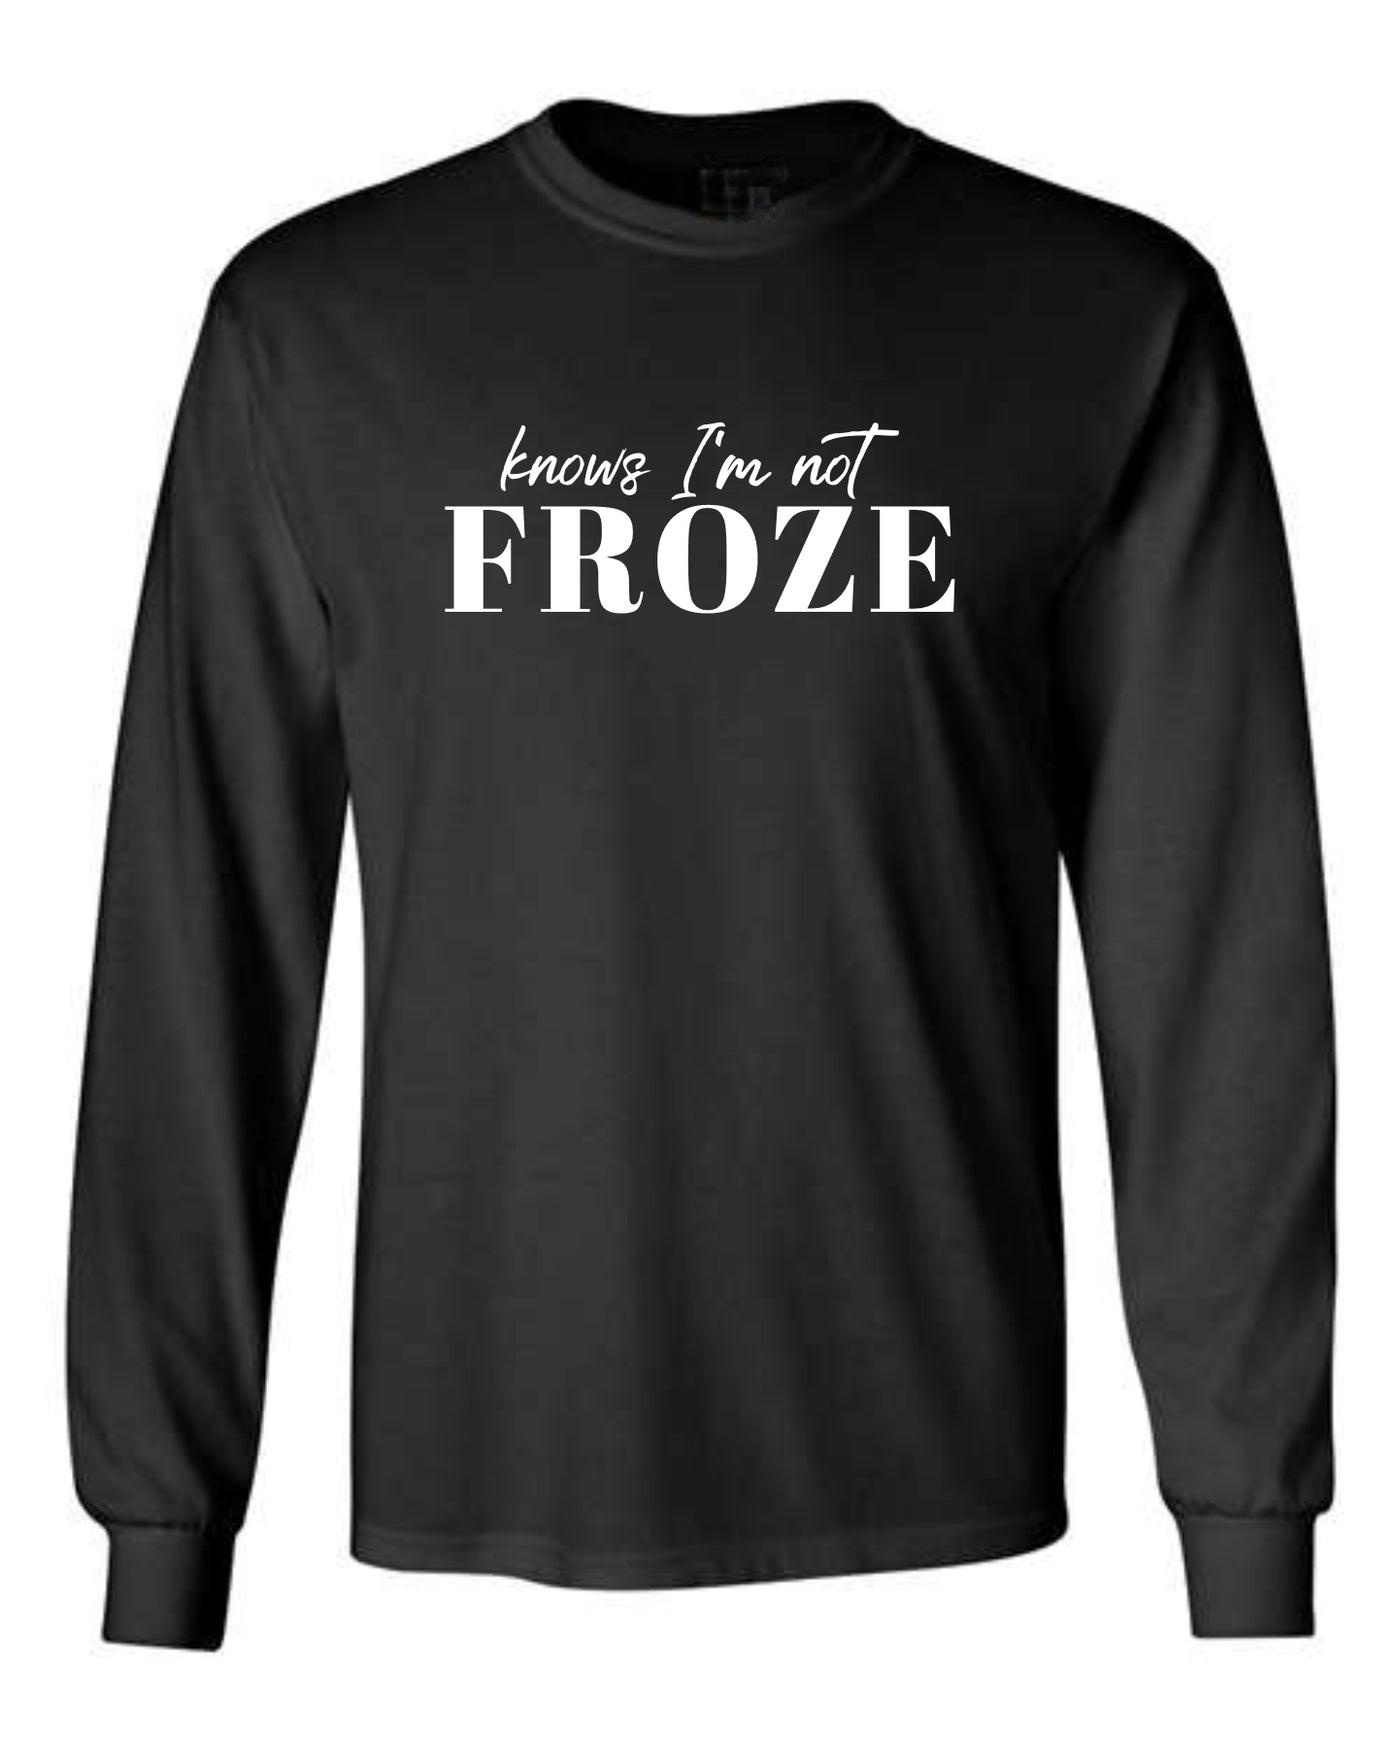 "Knows I'm Not Froze" Unisex Long Sleeve T-shirt